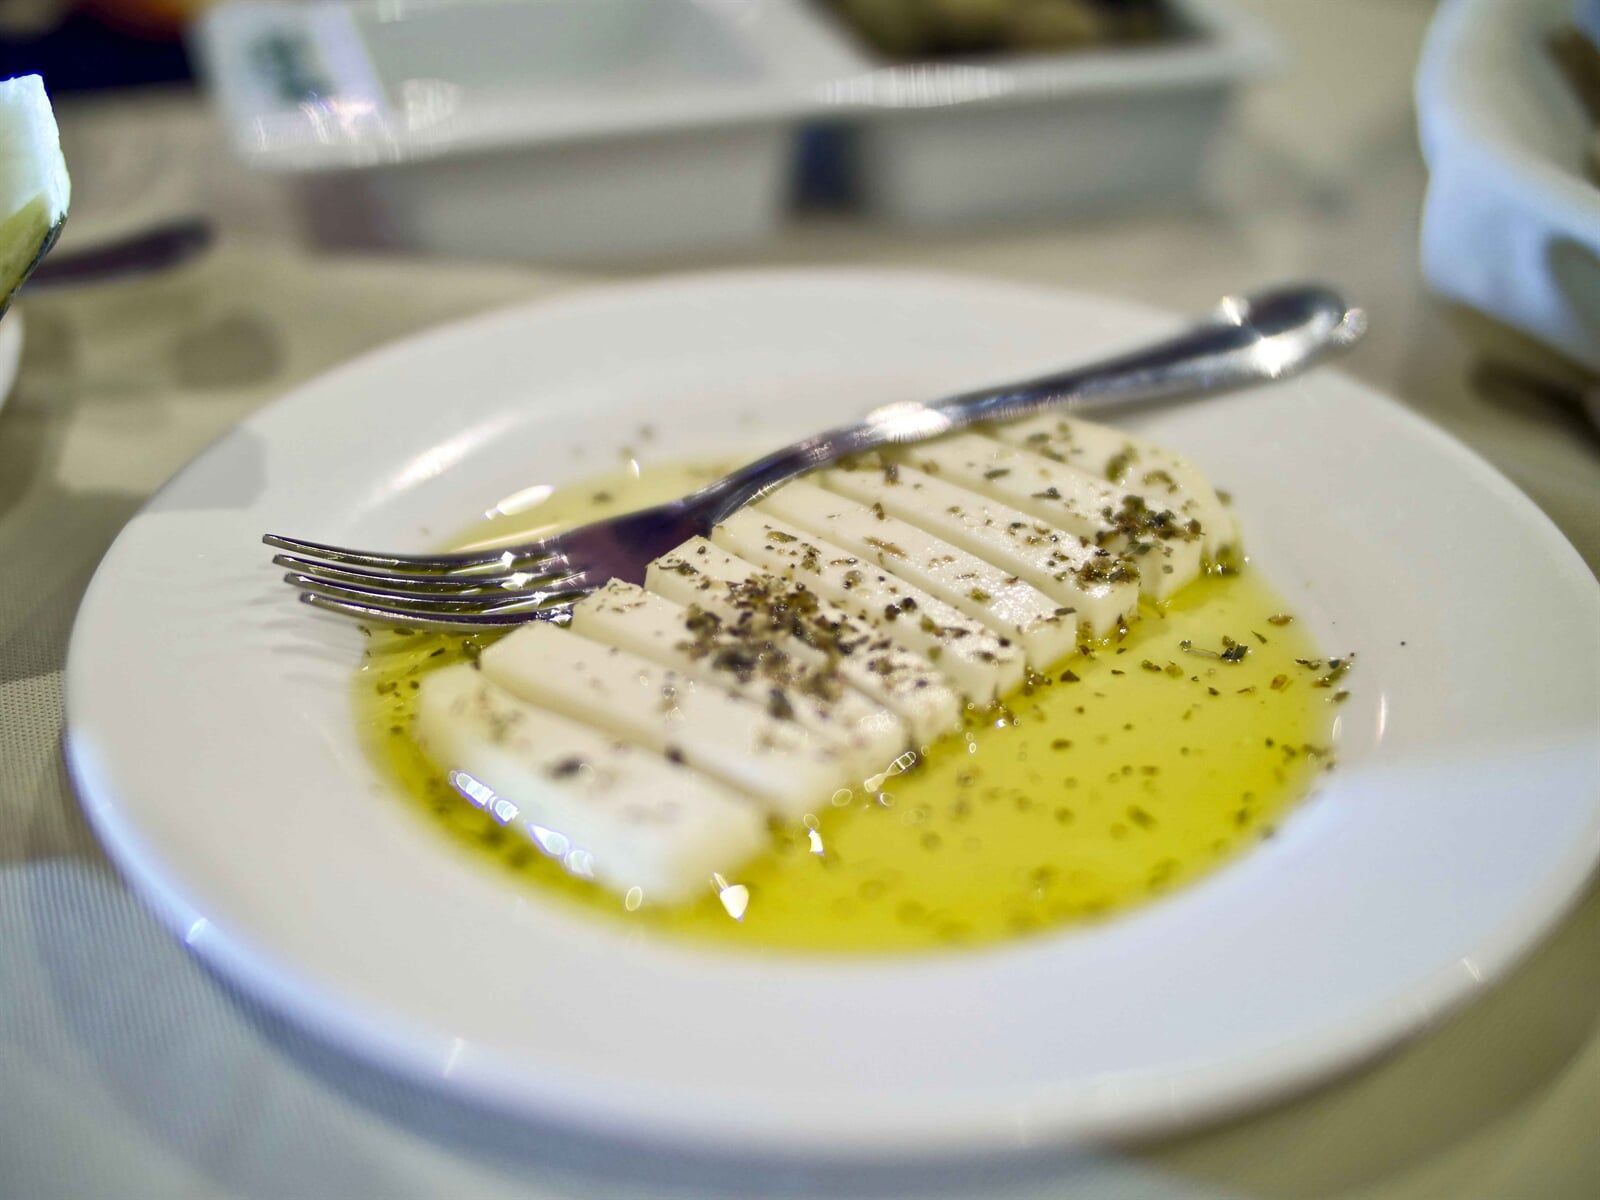 Cheese on olive oil and oregano